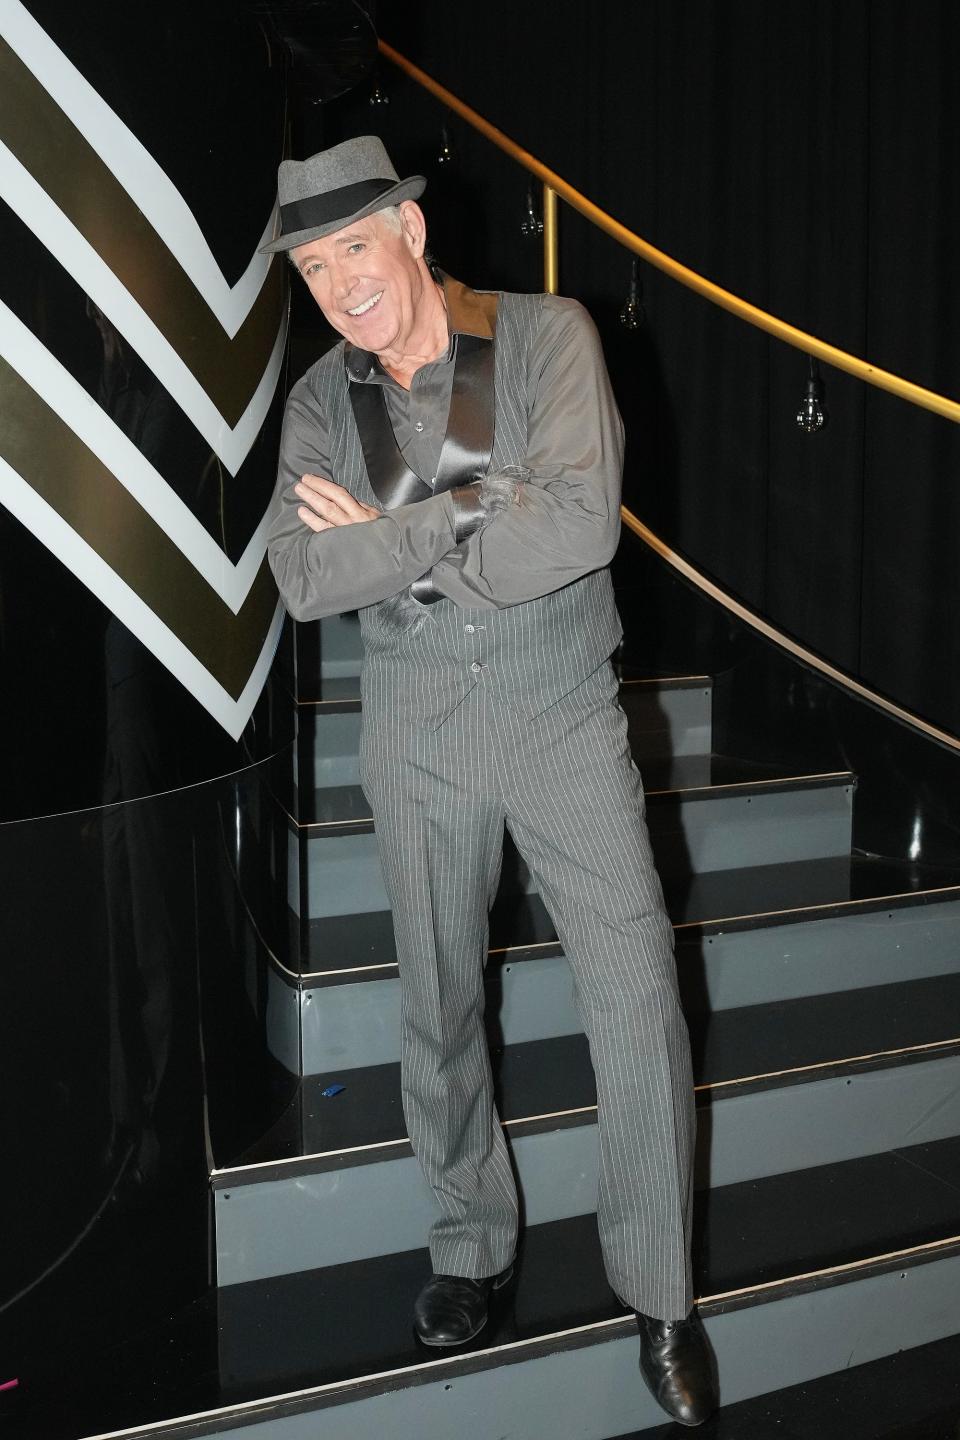 Barry Williams dressed up for Disney night on "Dancing With the Stars" on Oct. 17.